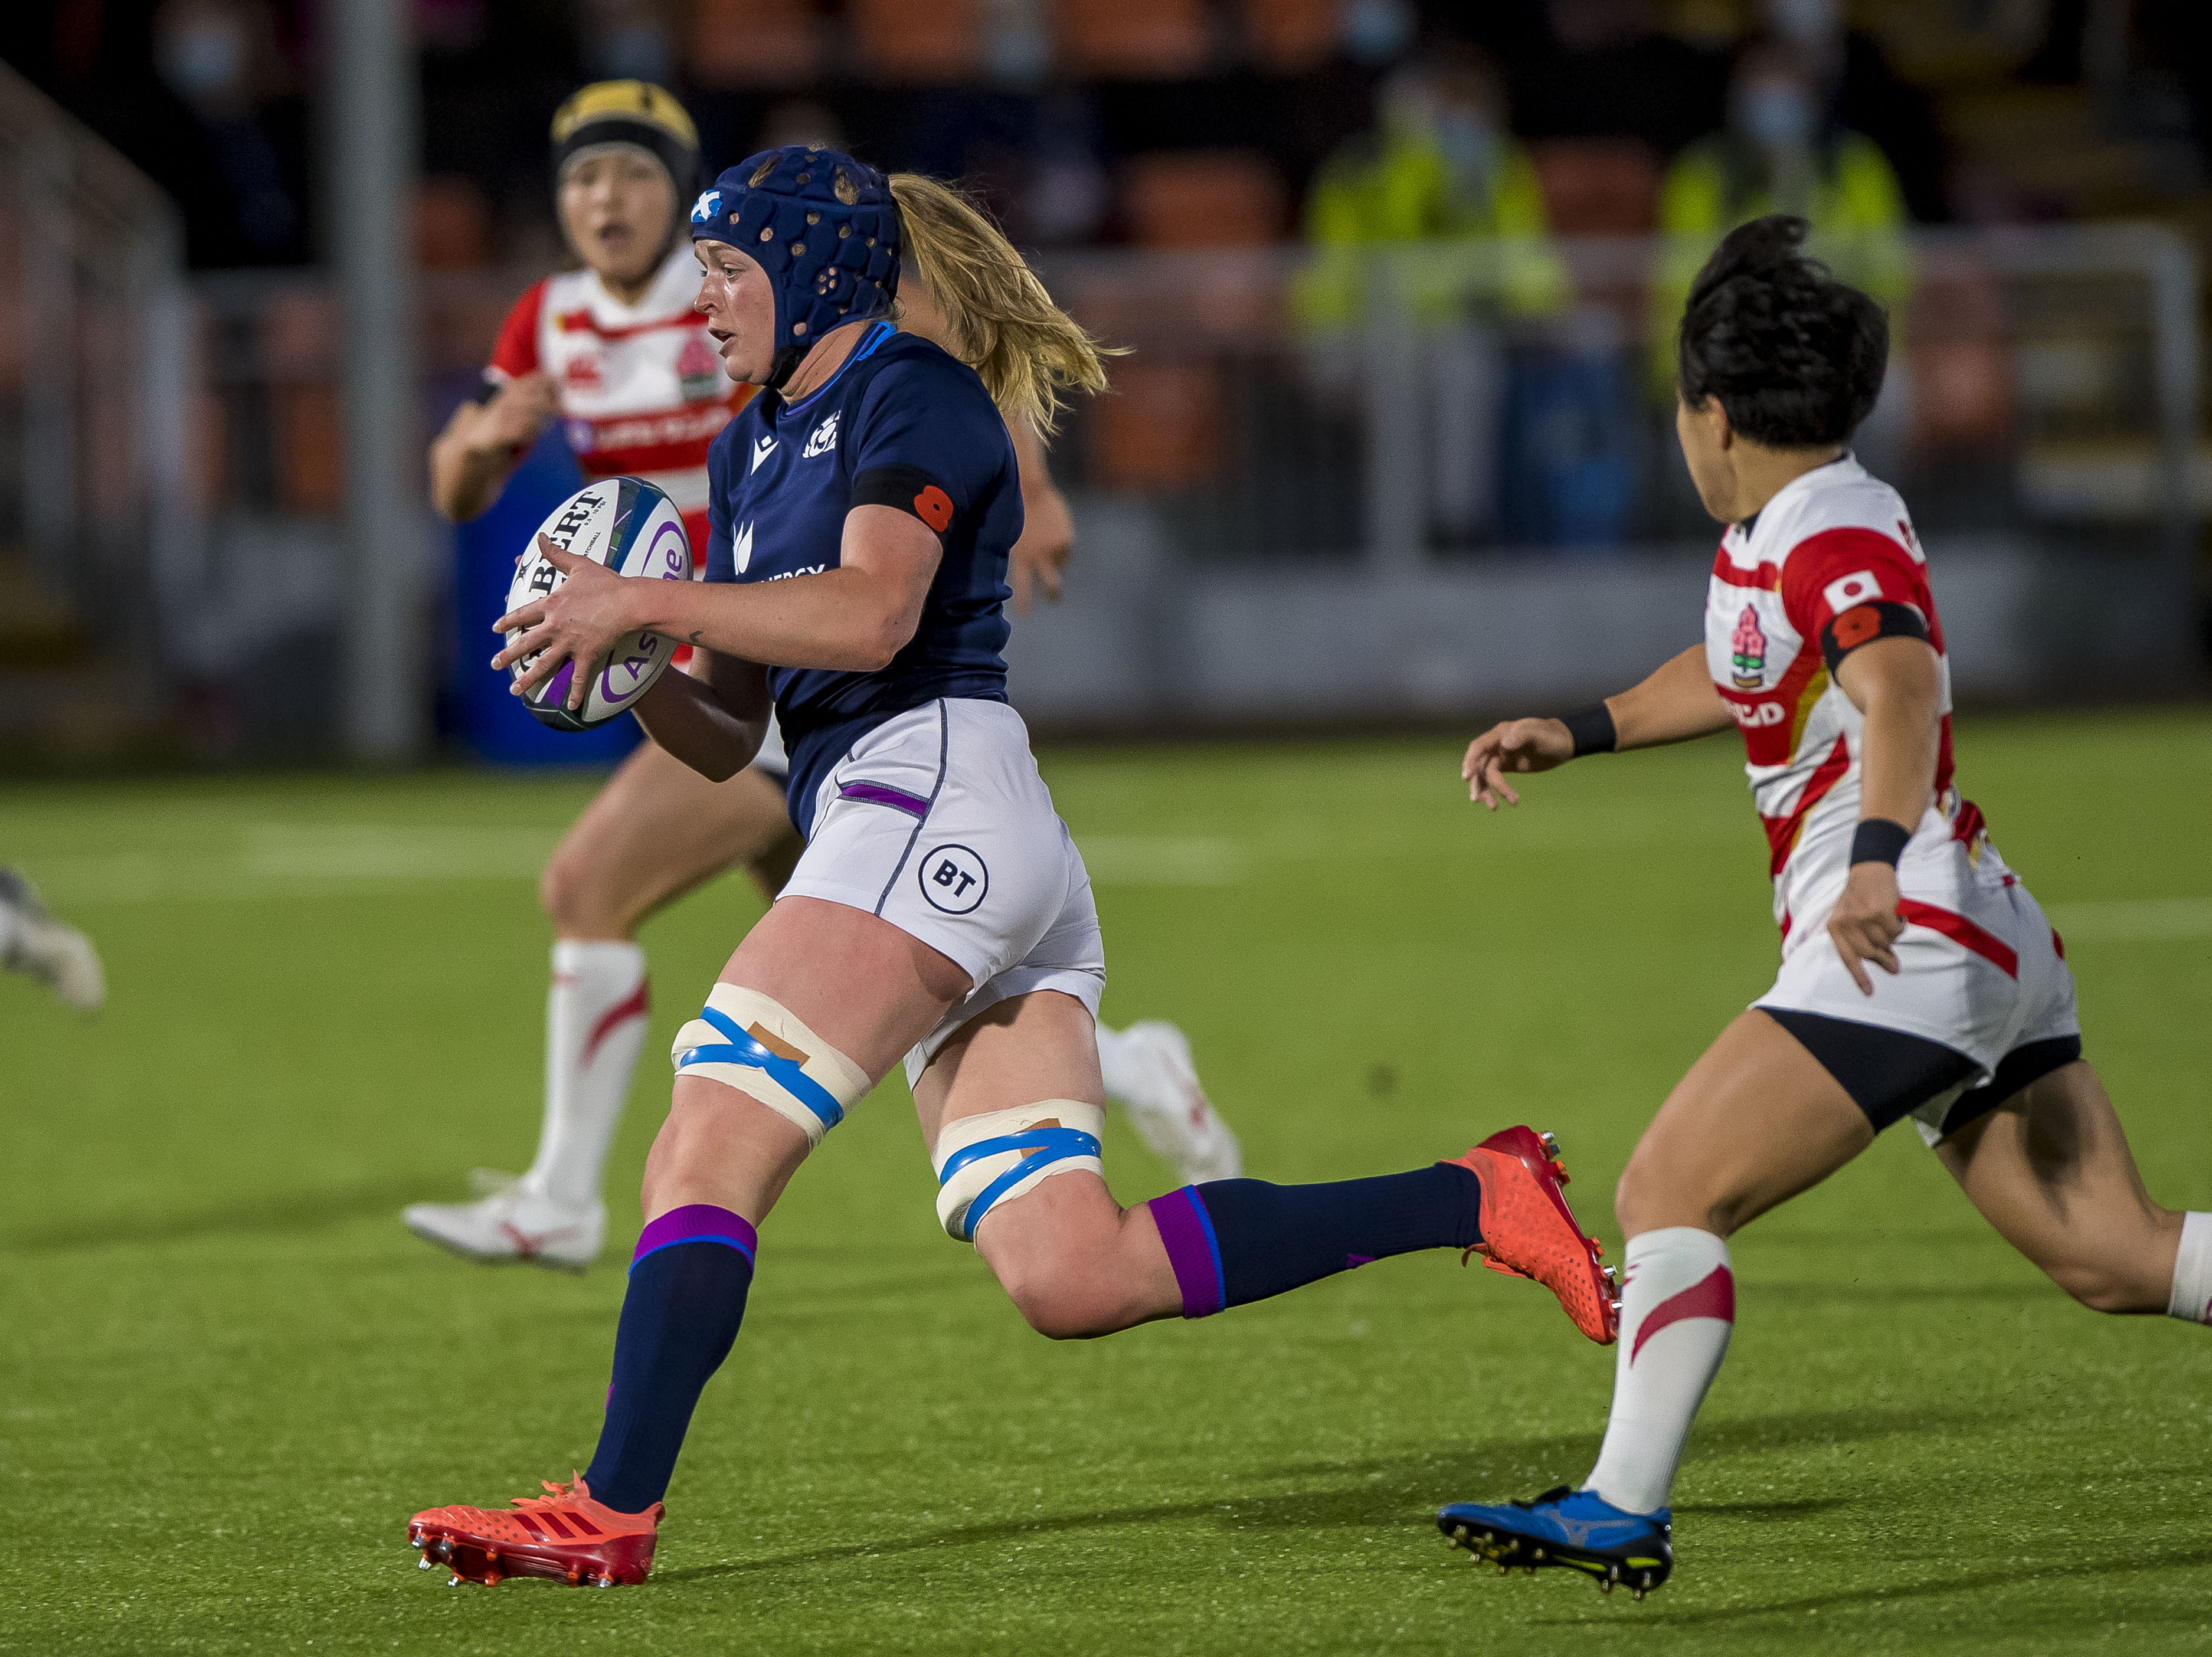 Image shows three female rugby players.